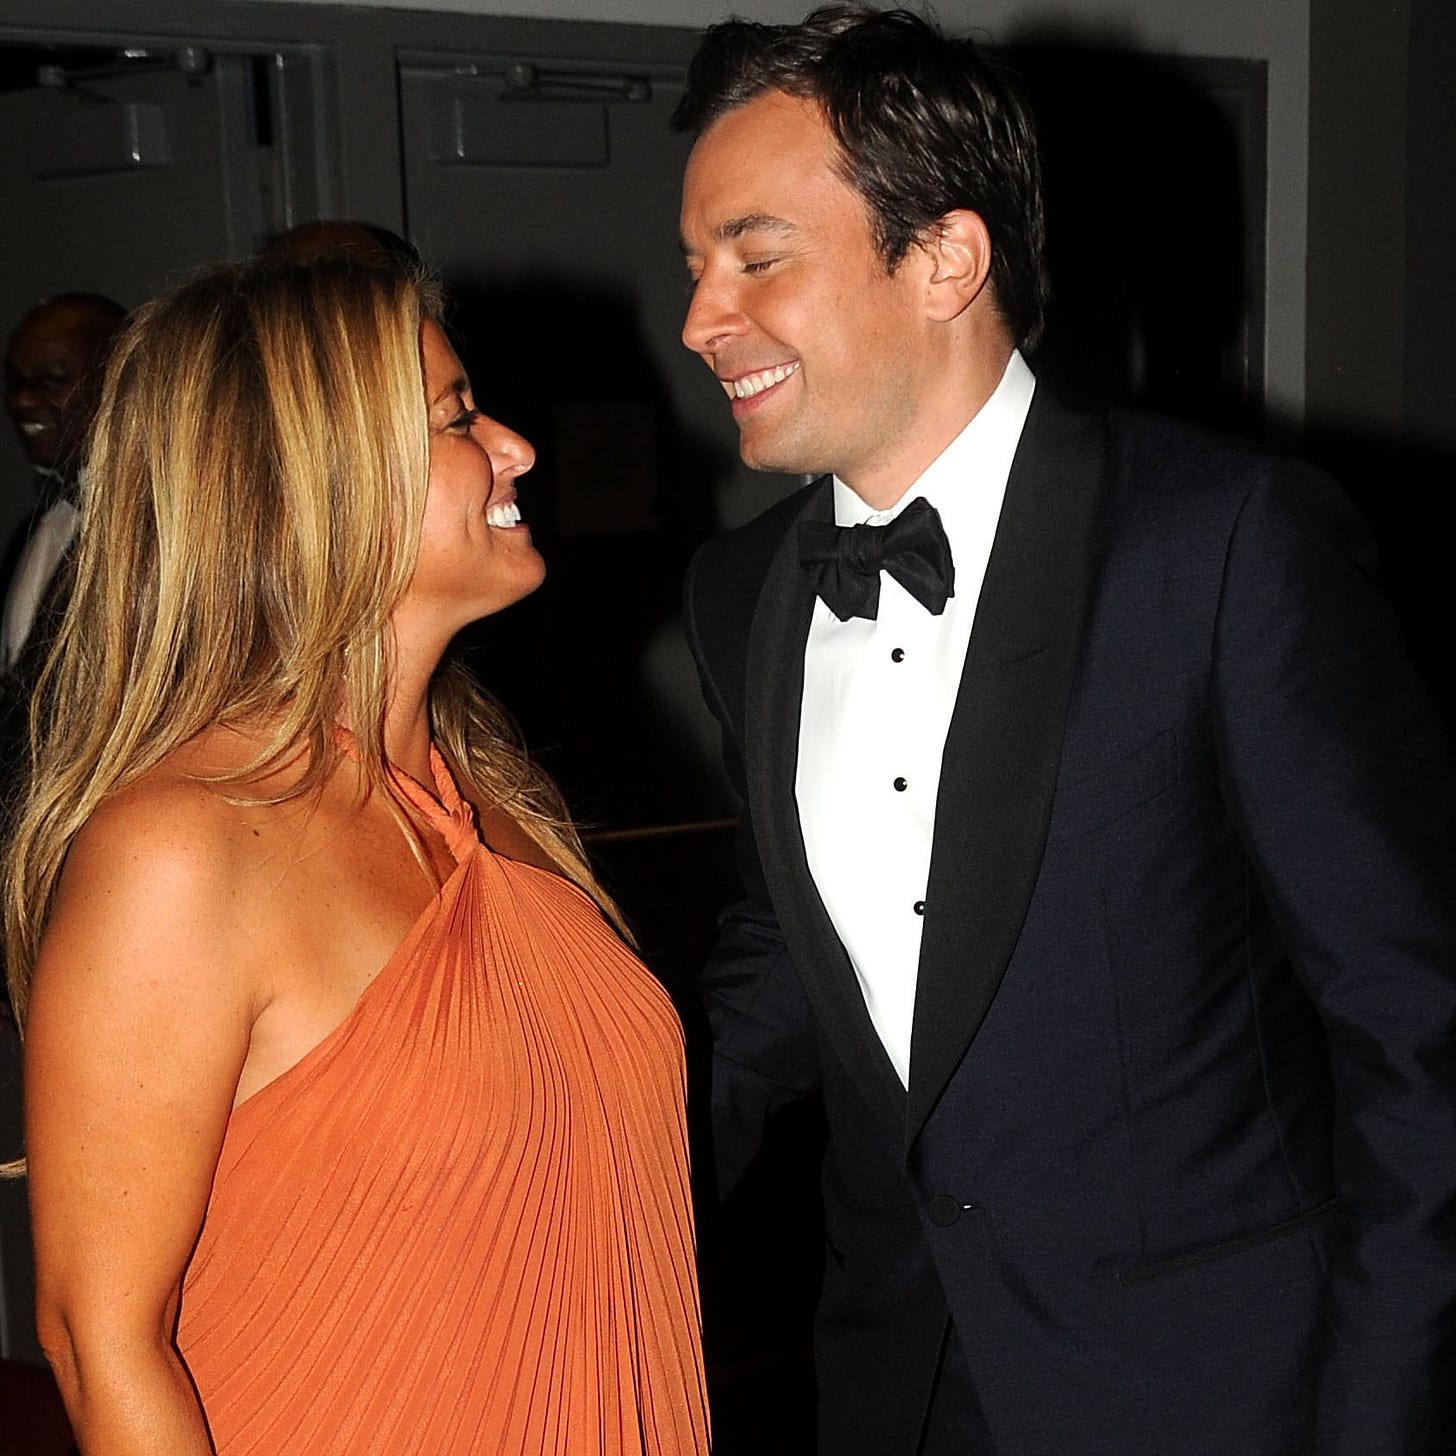 Jimmy Fallon and His Wife, Nancy Juvonen, Cute Pictures | POPSUGAR Celebrity